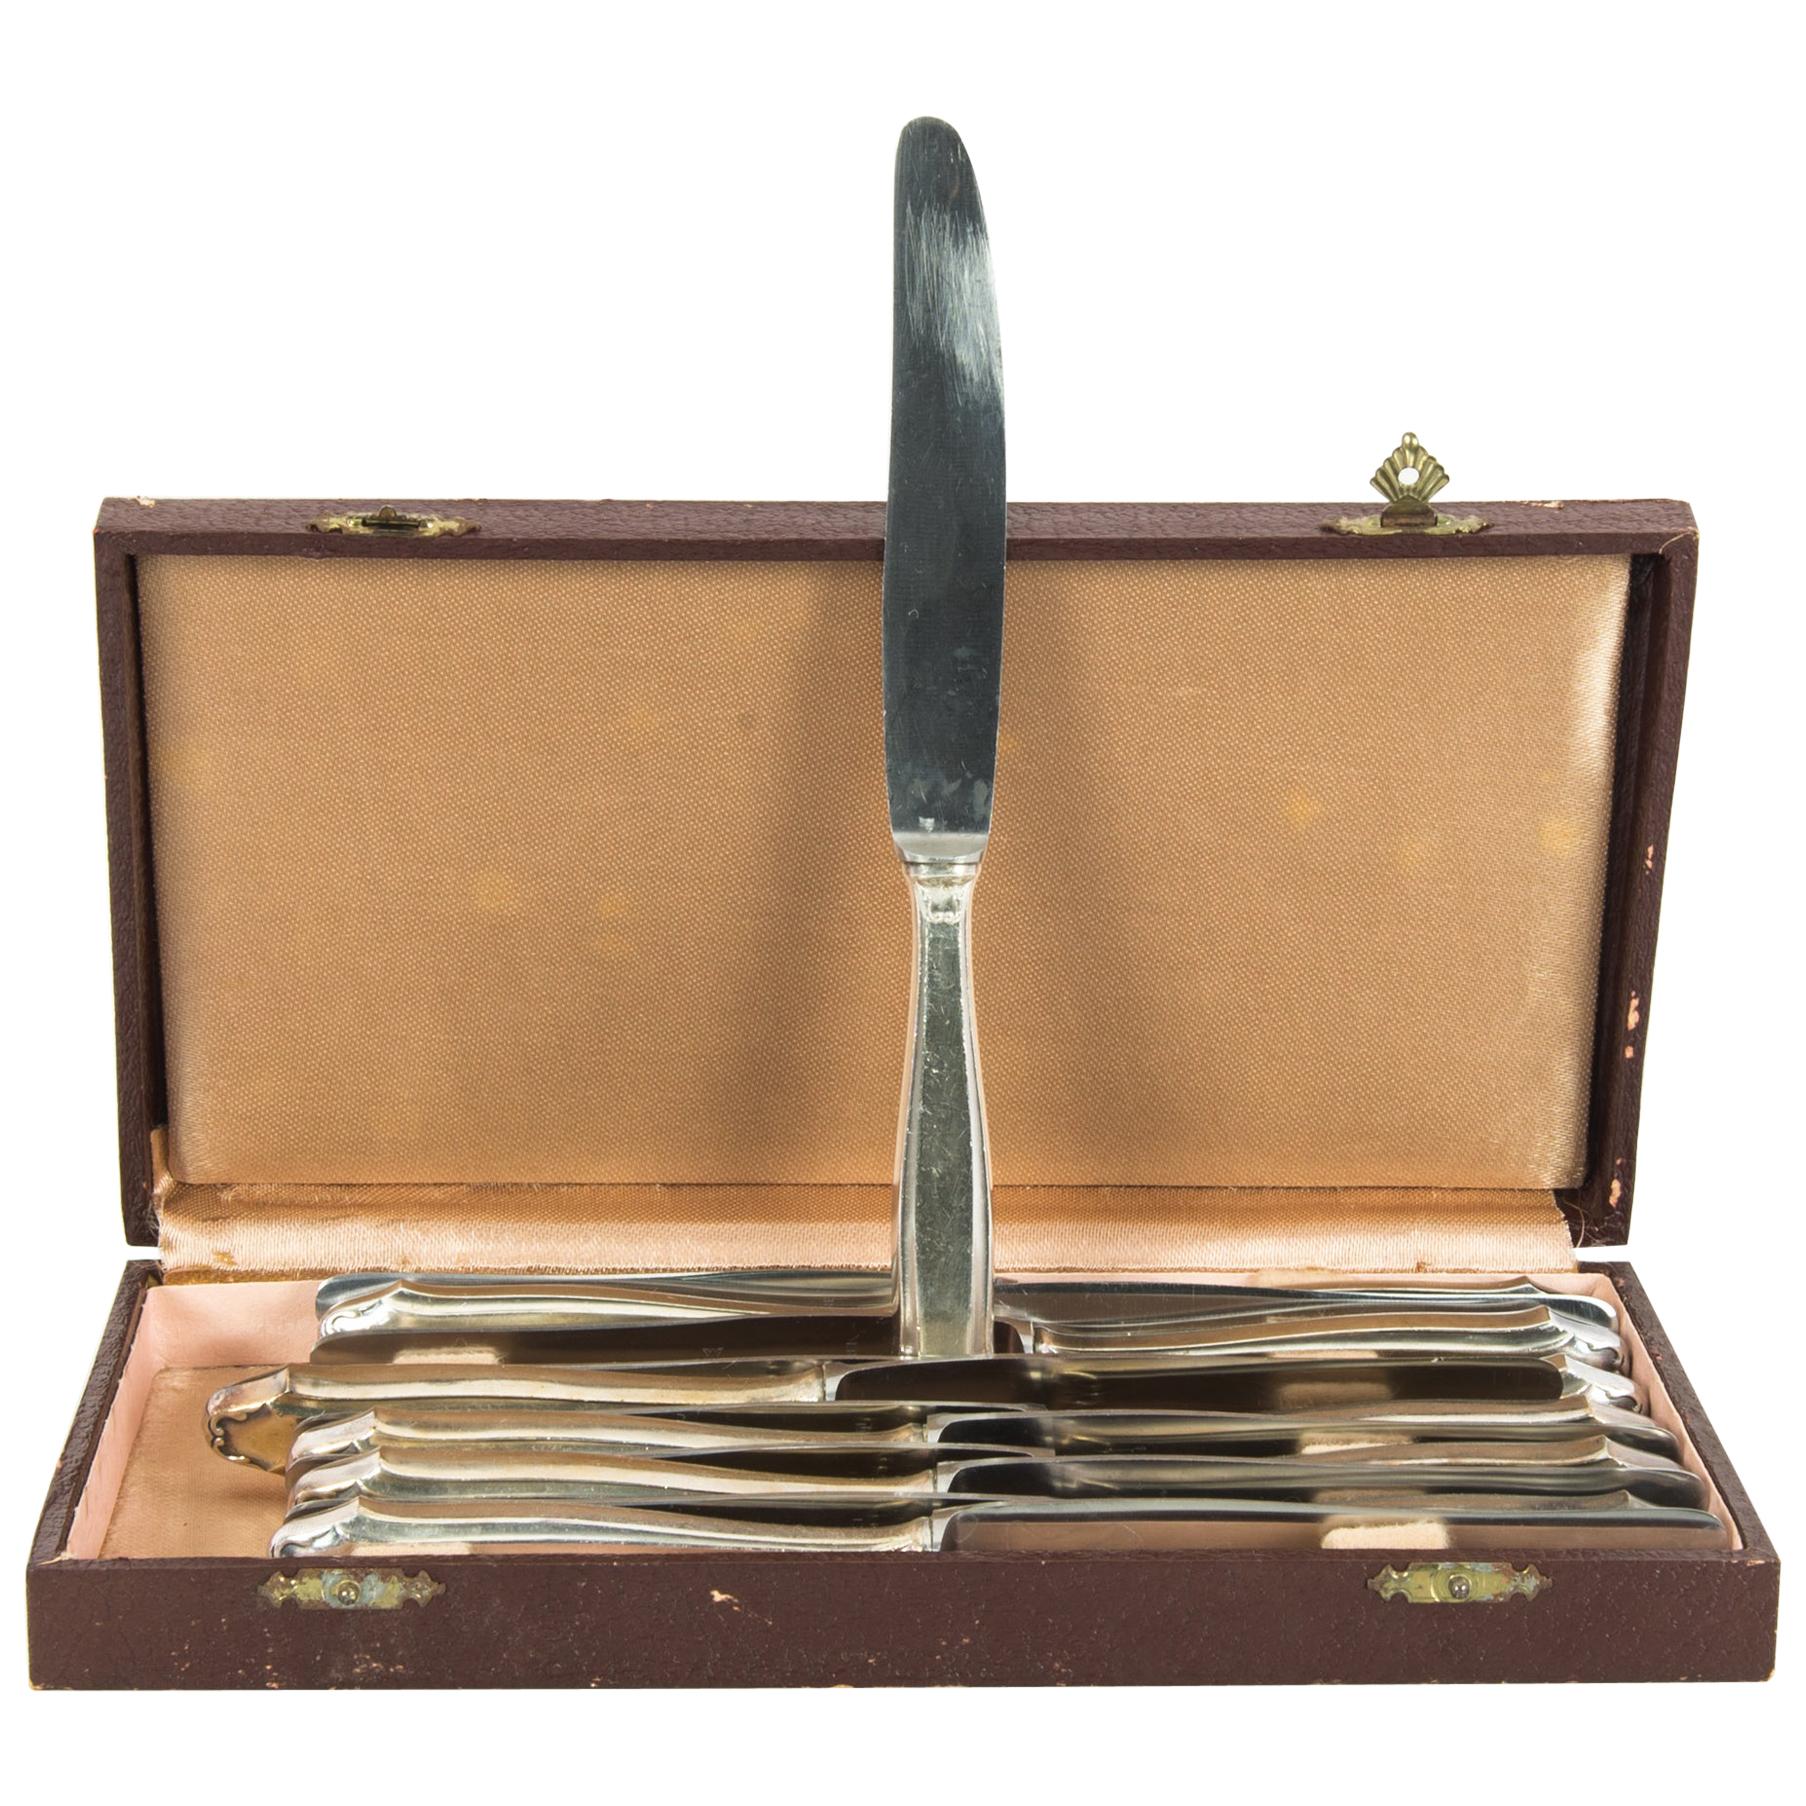 1920s Set of Silver-Plated Knives in Leather Box